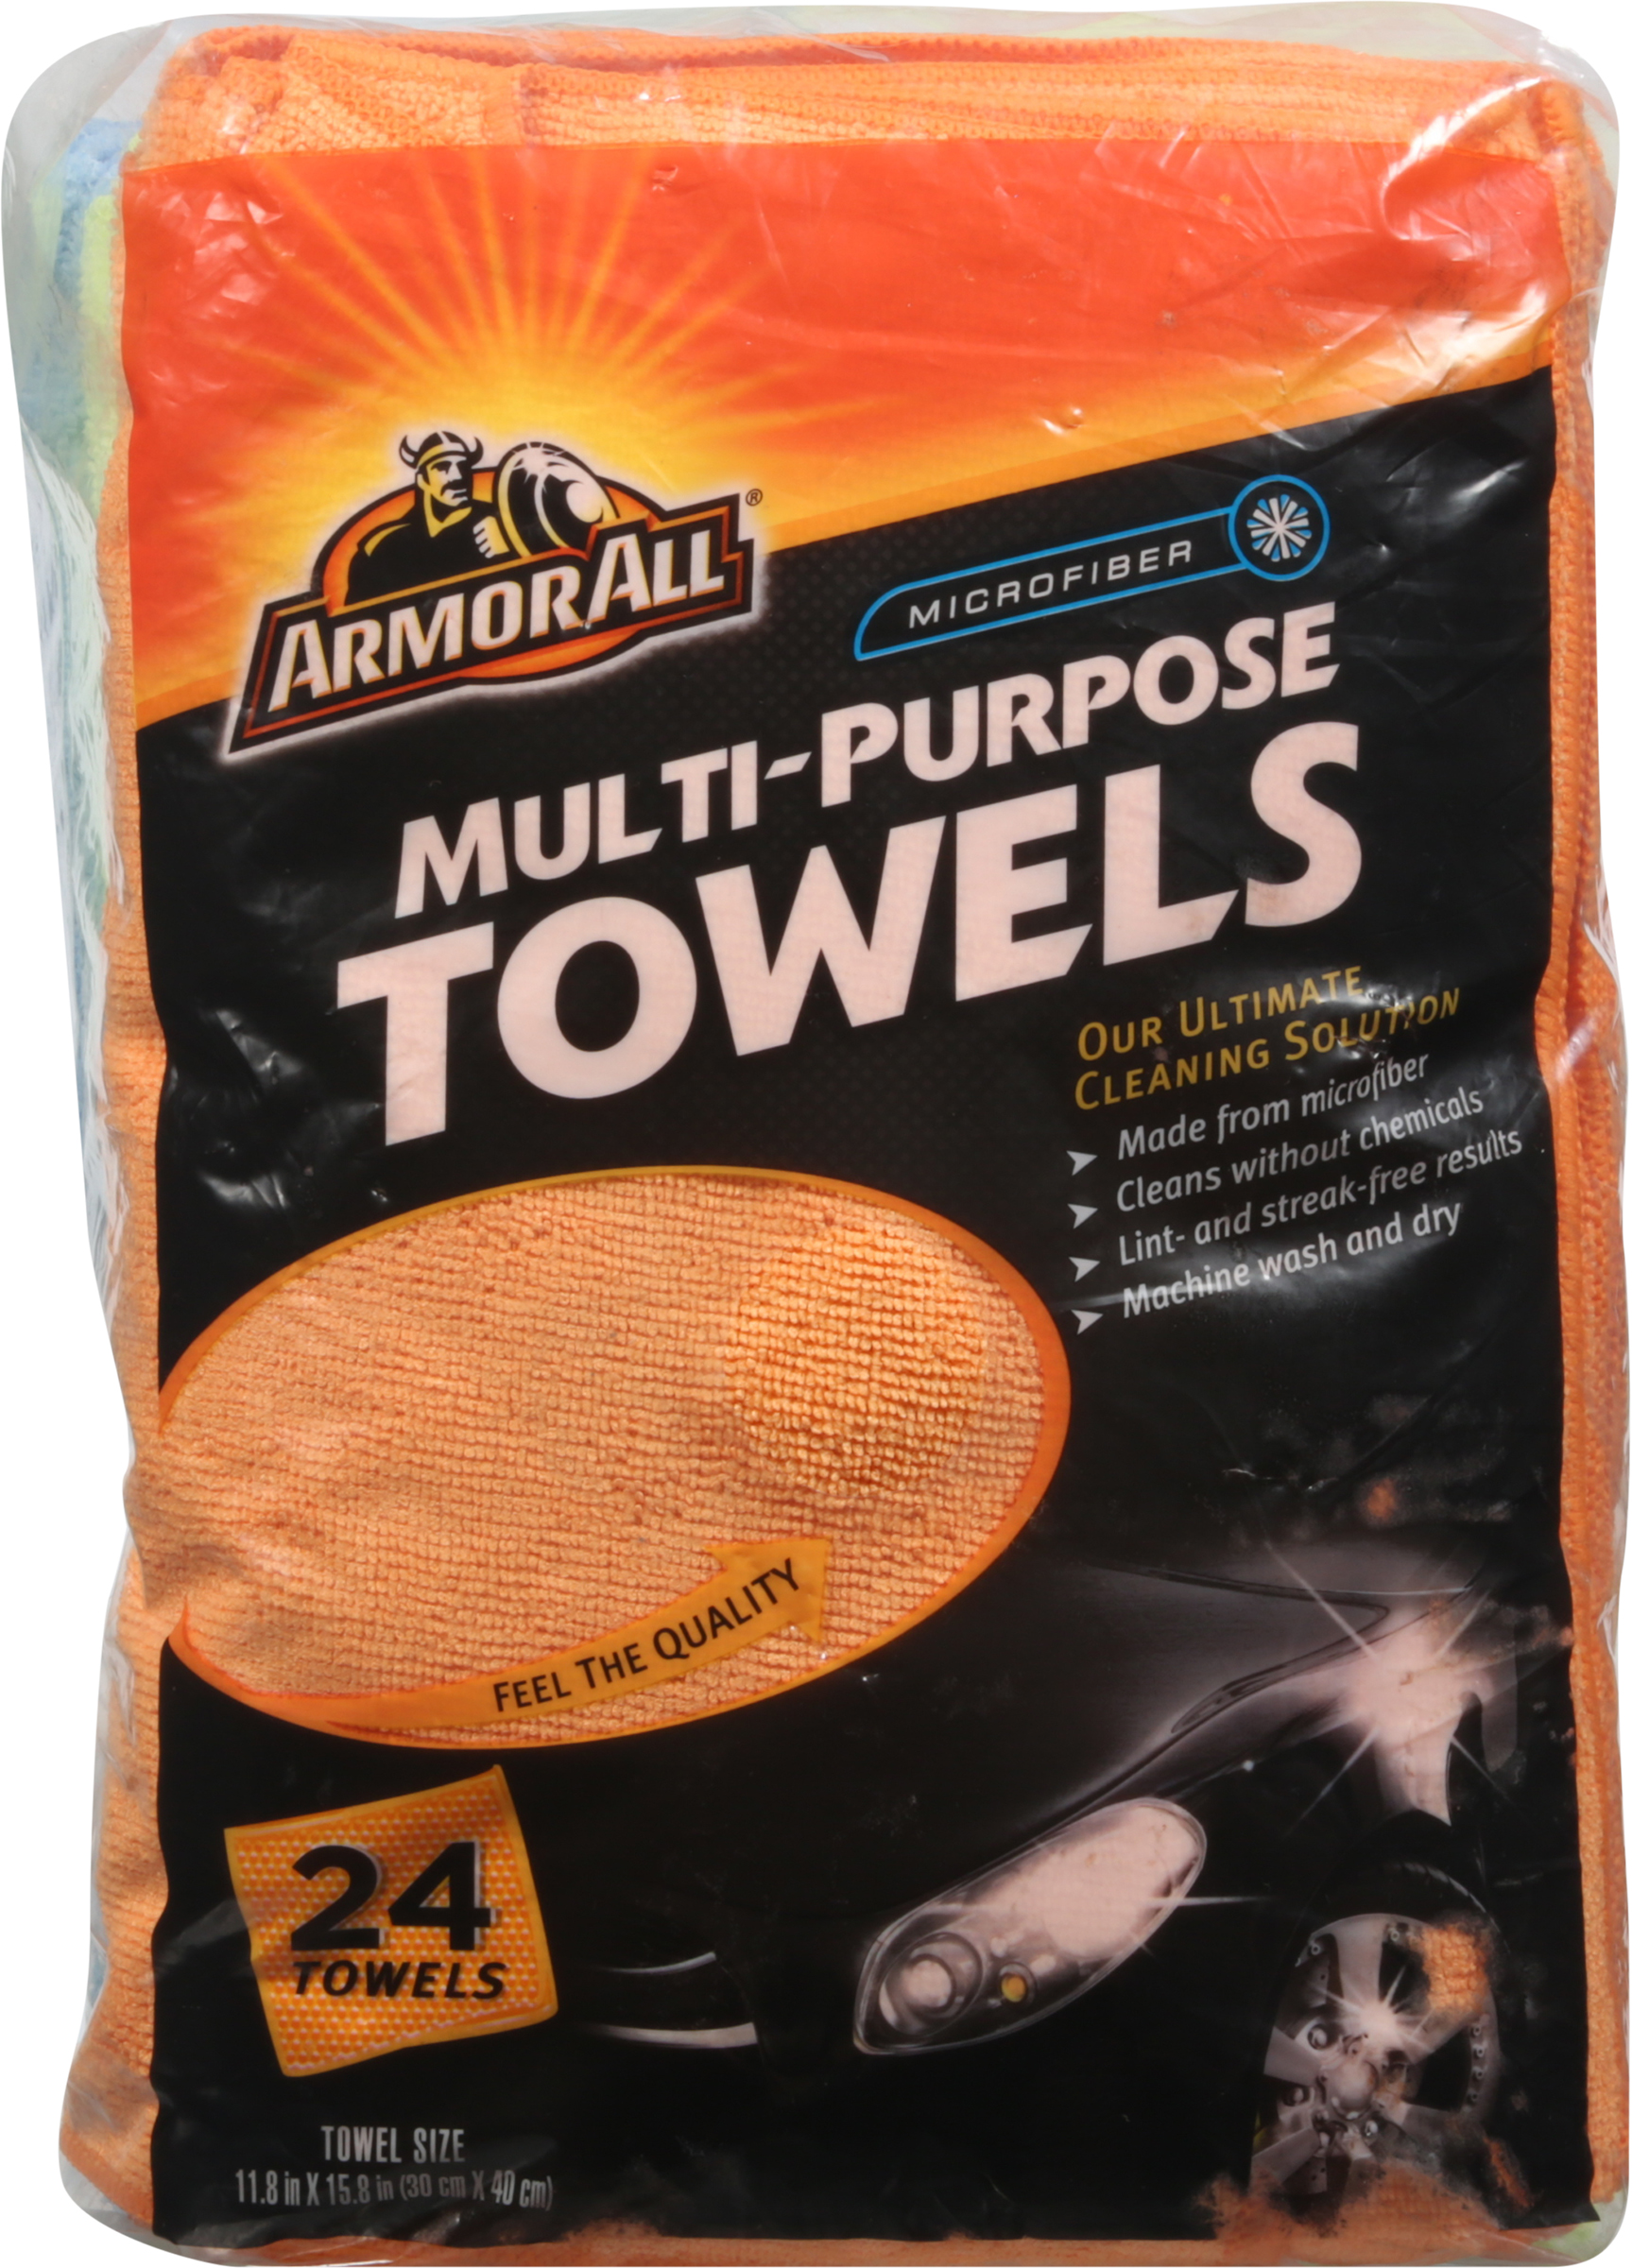 Armor All Microfiber Car Cleaning Towels, Cleaner for Bugs, Dirt  Dust,  For Cars  Truck  Motorcycle, Pack of 24, 17622